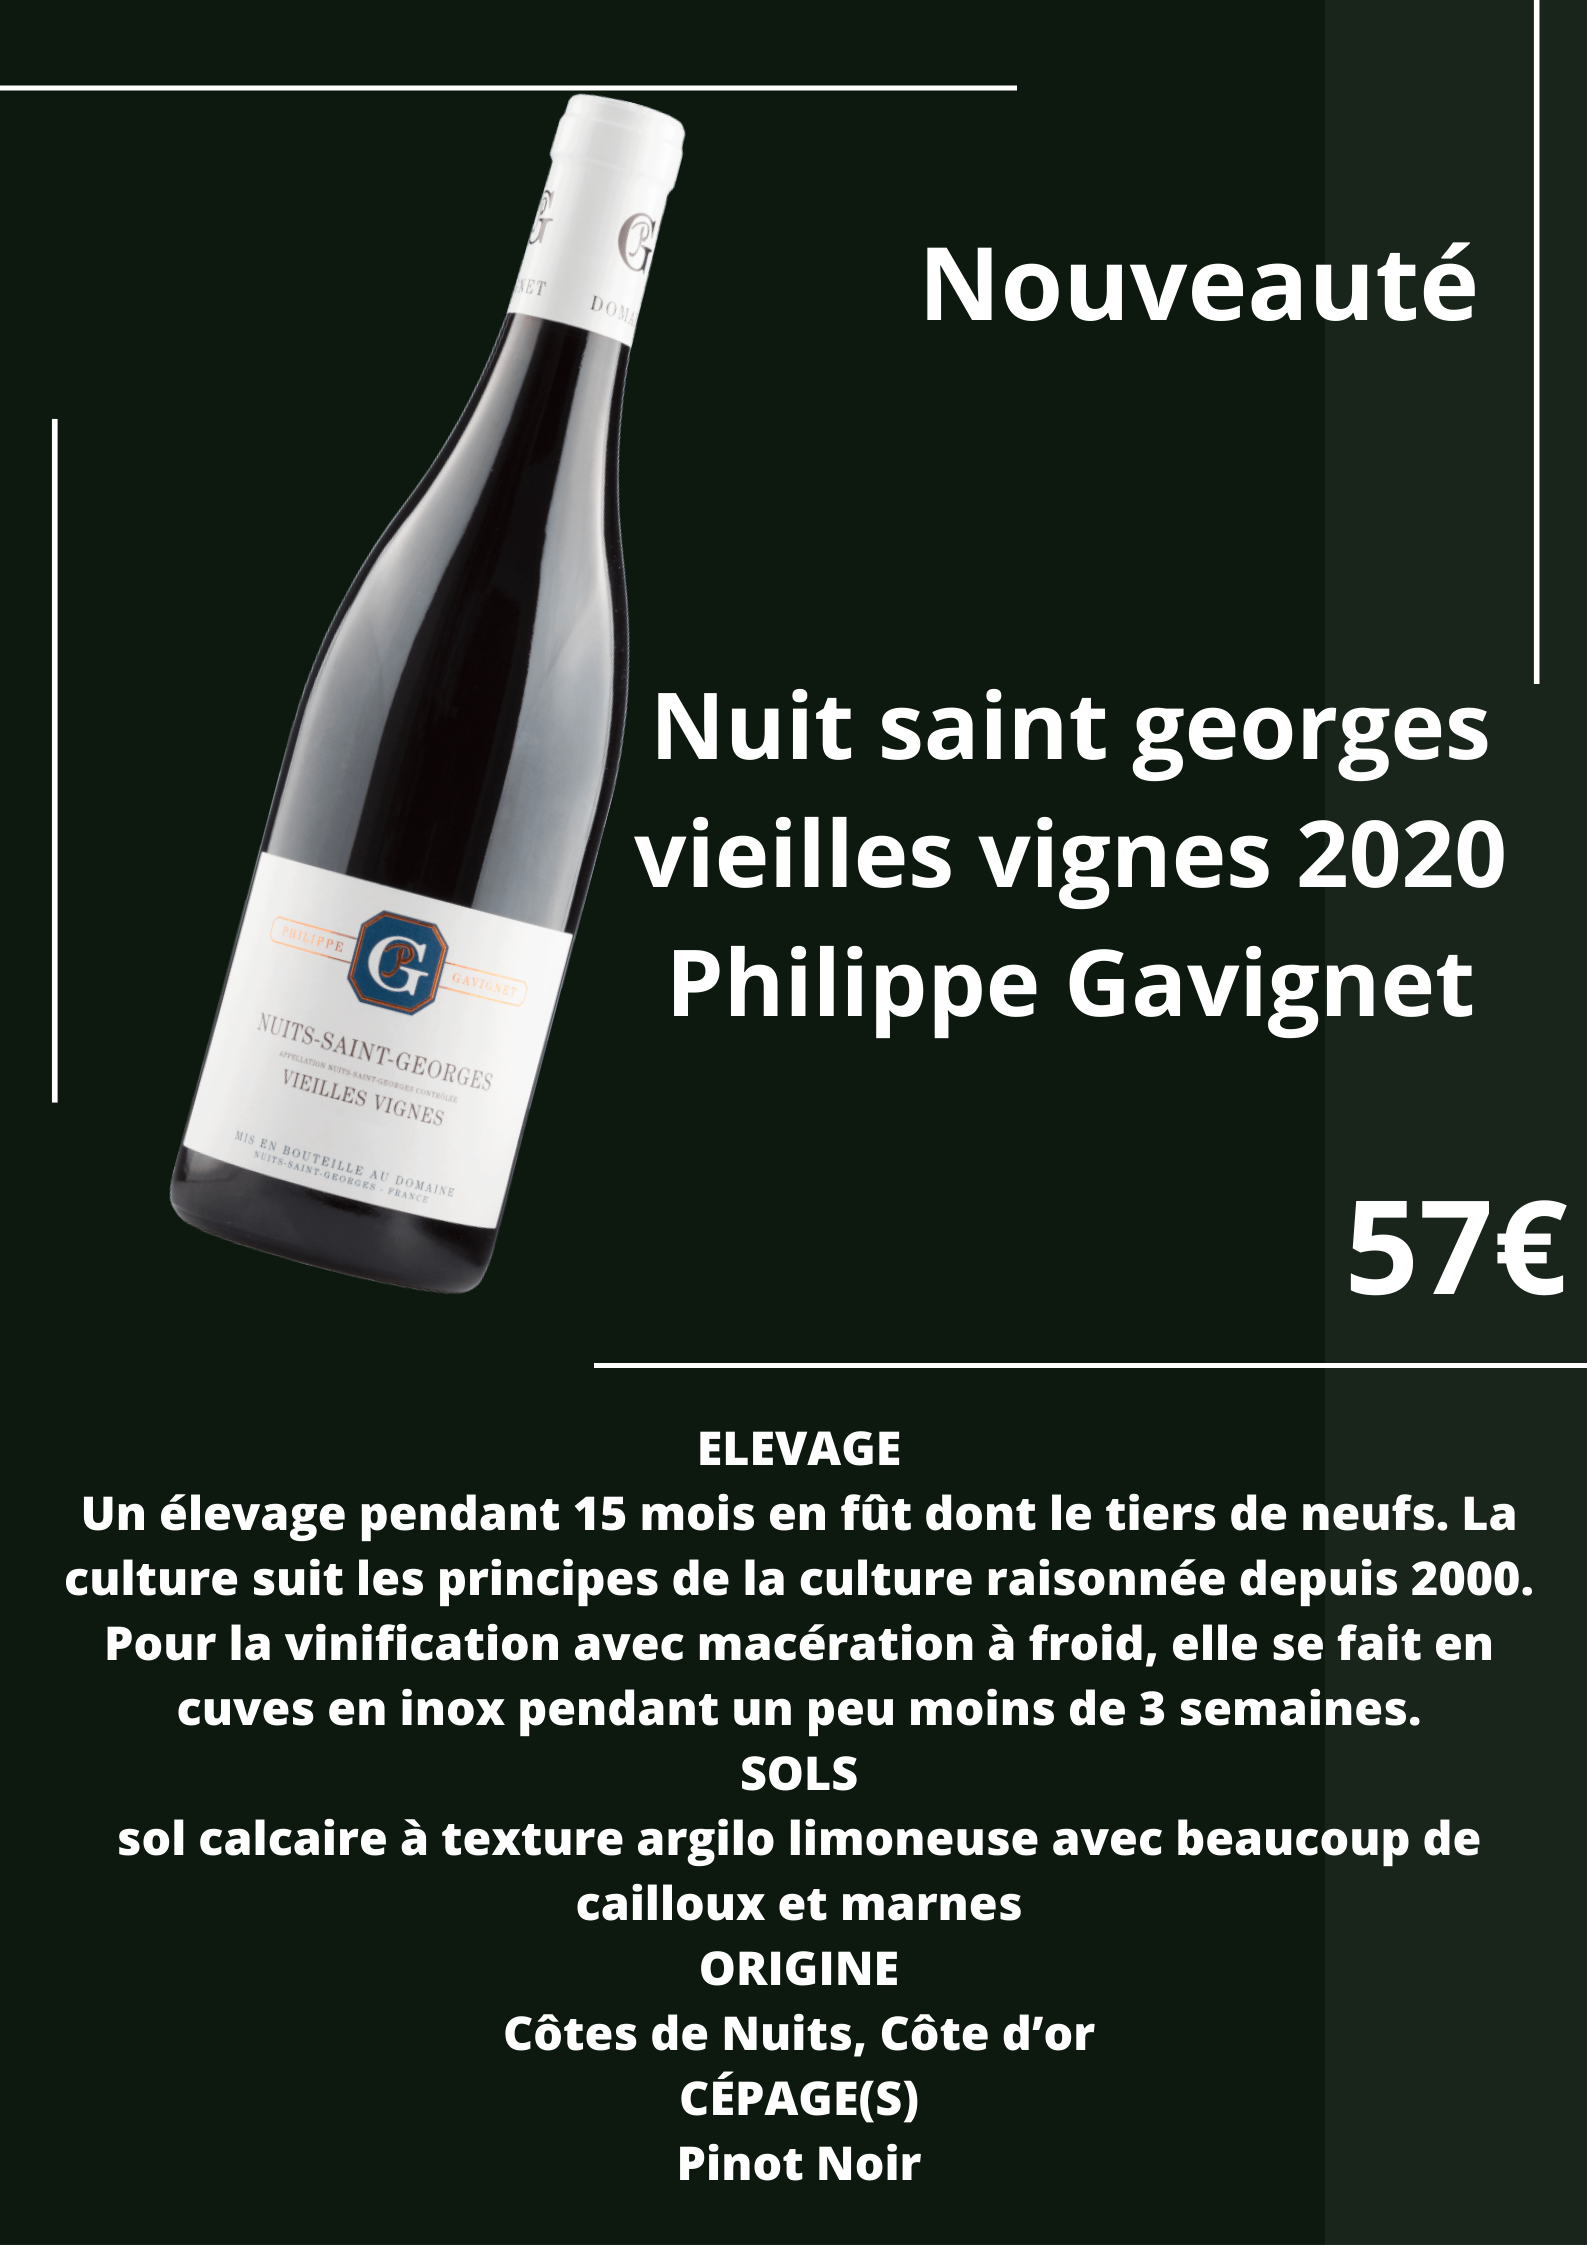 You are currently viewing Nuit saint georges vieilles vignes 2020 Philippe Gavignet